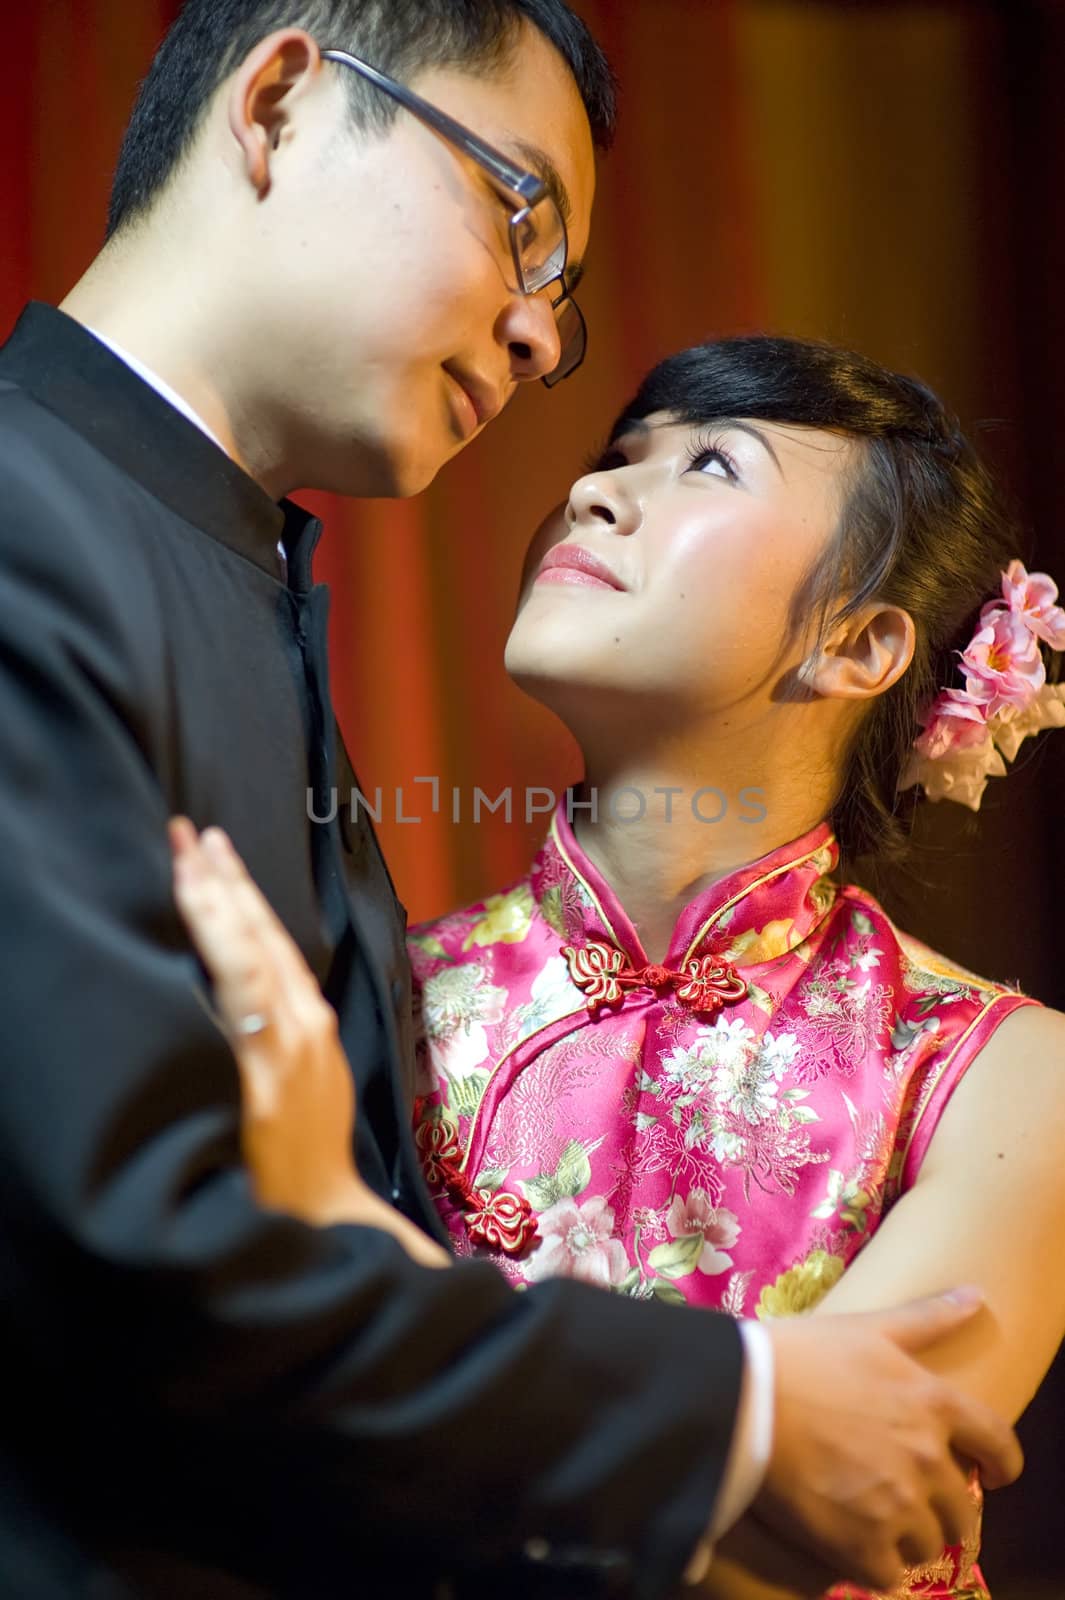 an affectionate young couple embracing before their wedding day by jackq